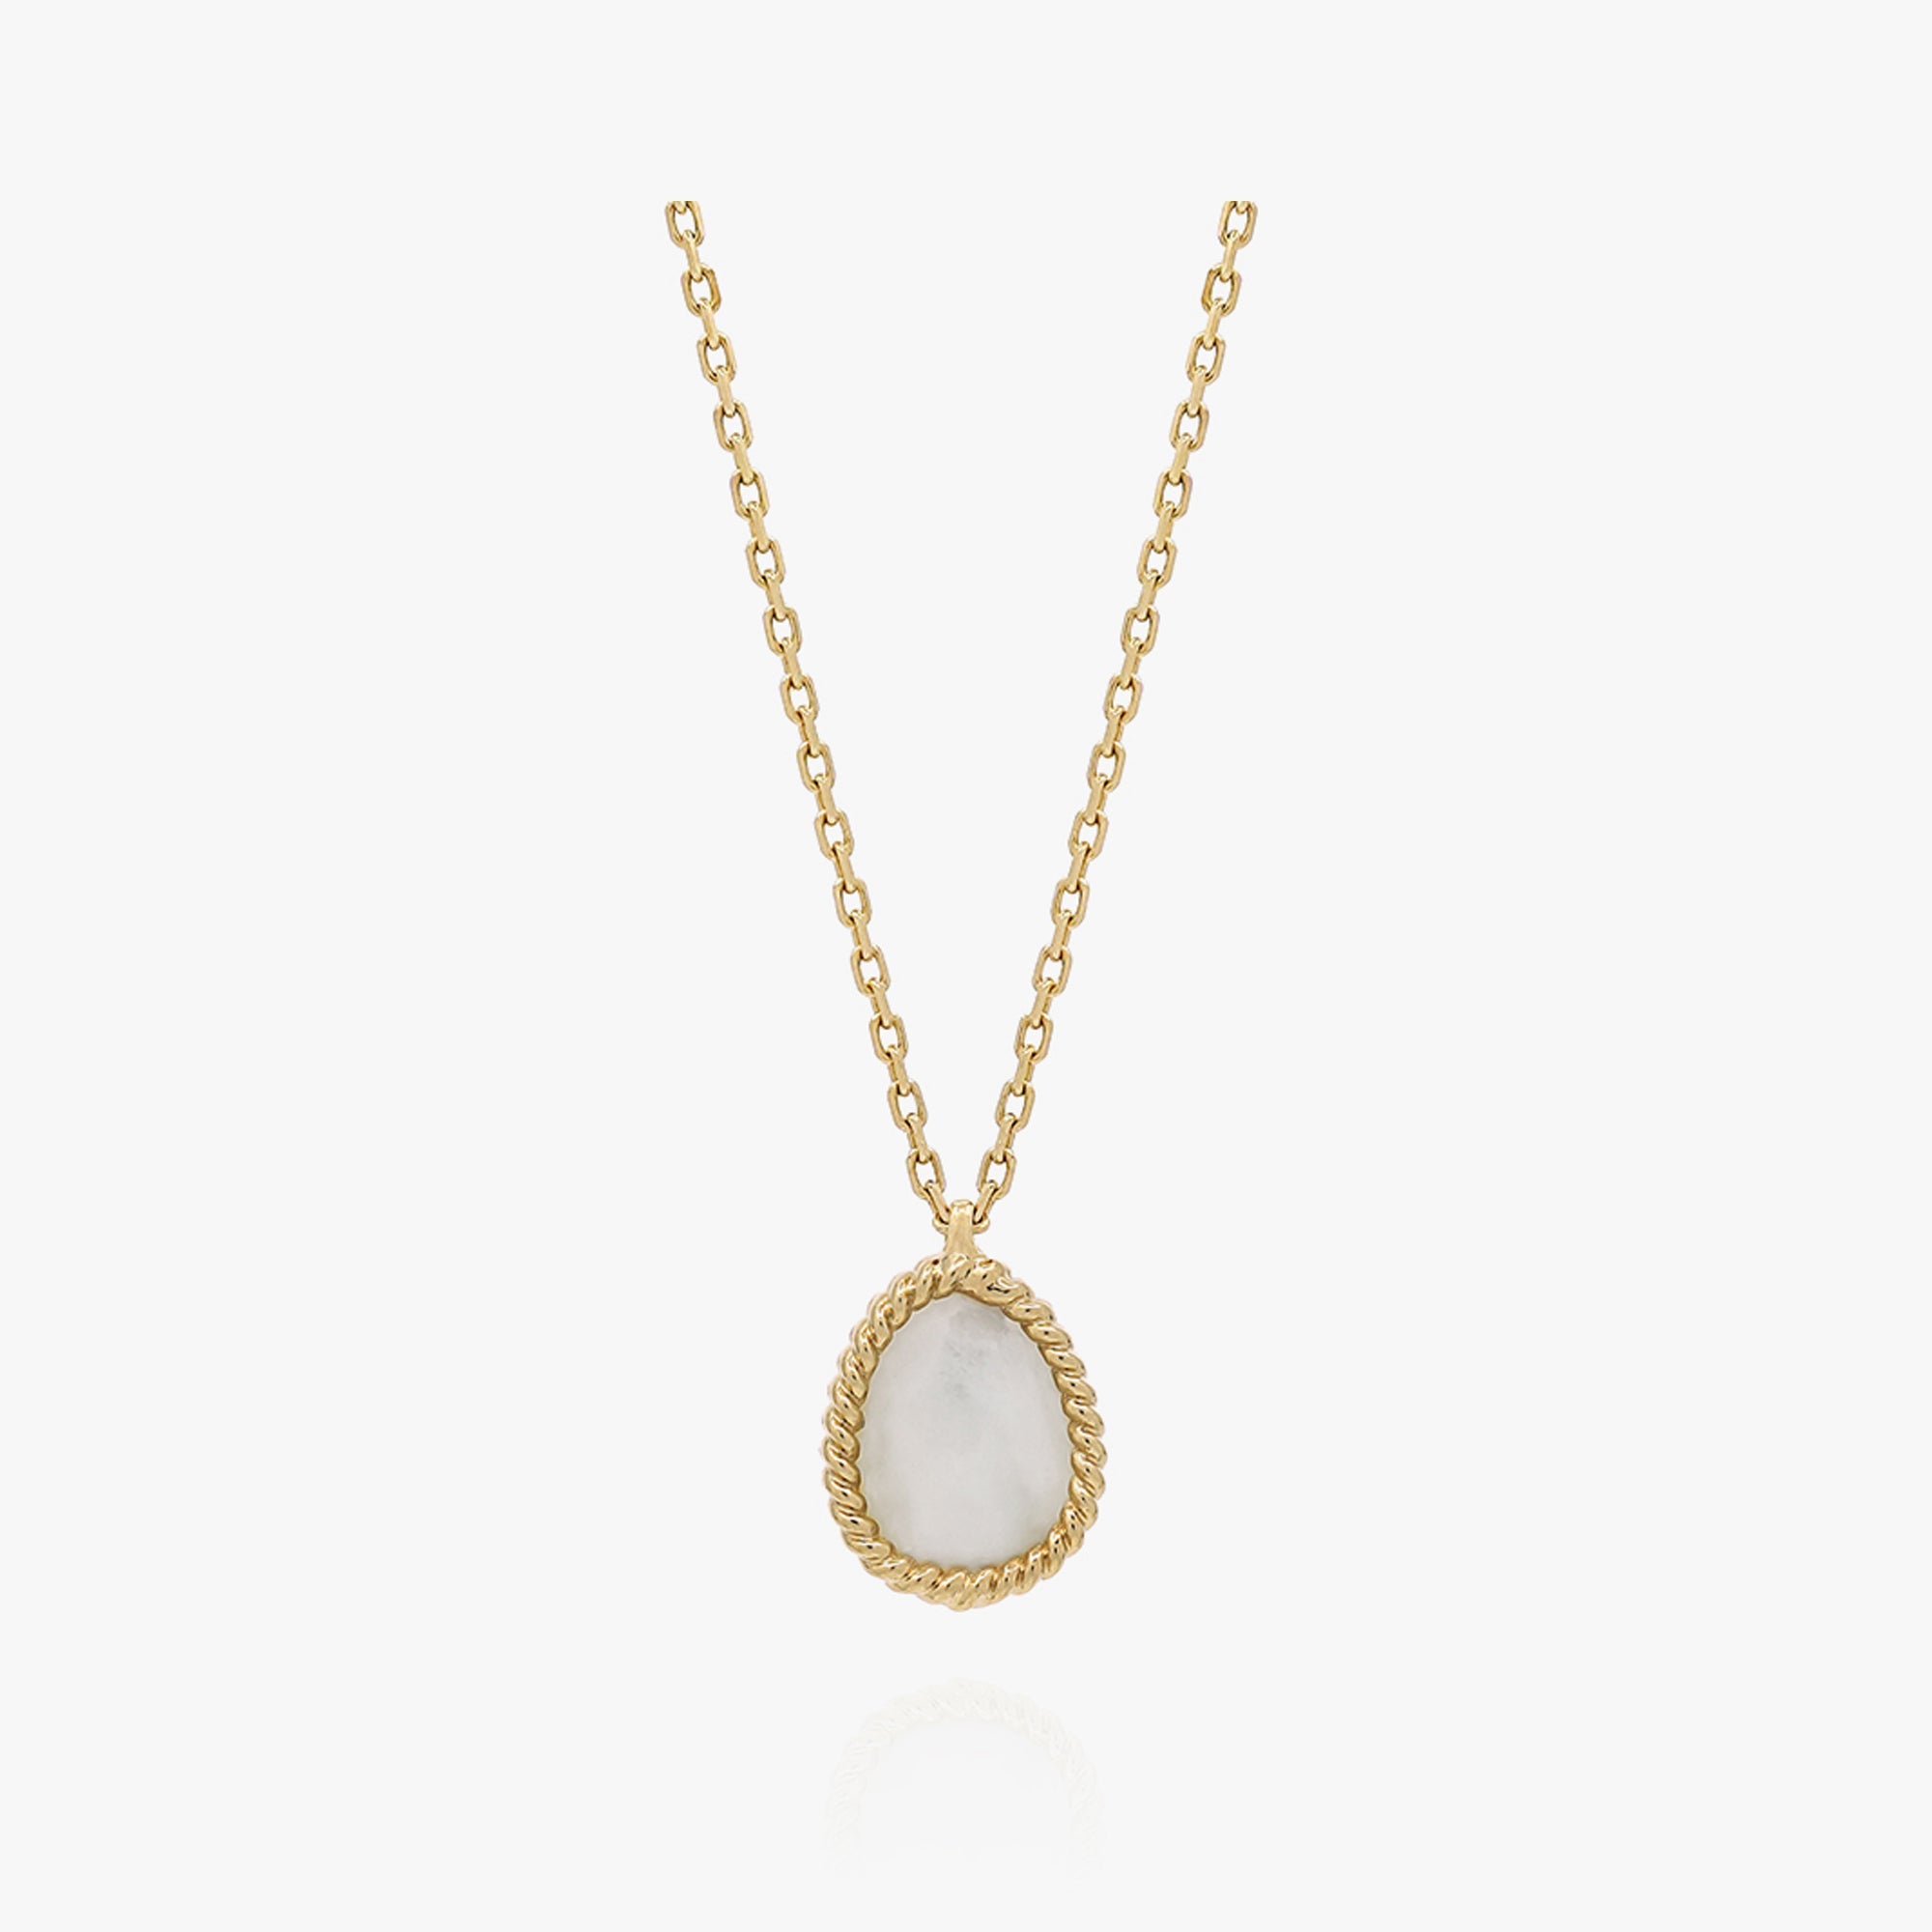 Nina Mariner Necklace In 18 Karat Yellow Gold With Petite Mother Of Pearl Stone